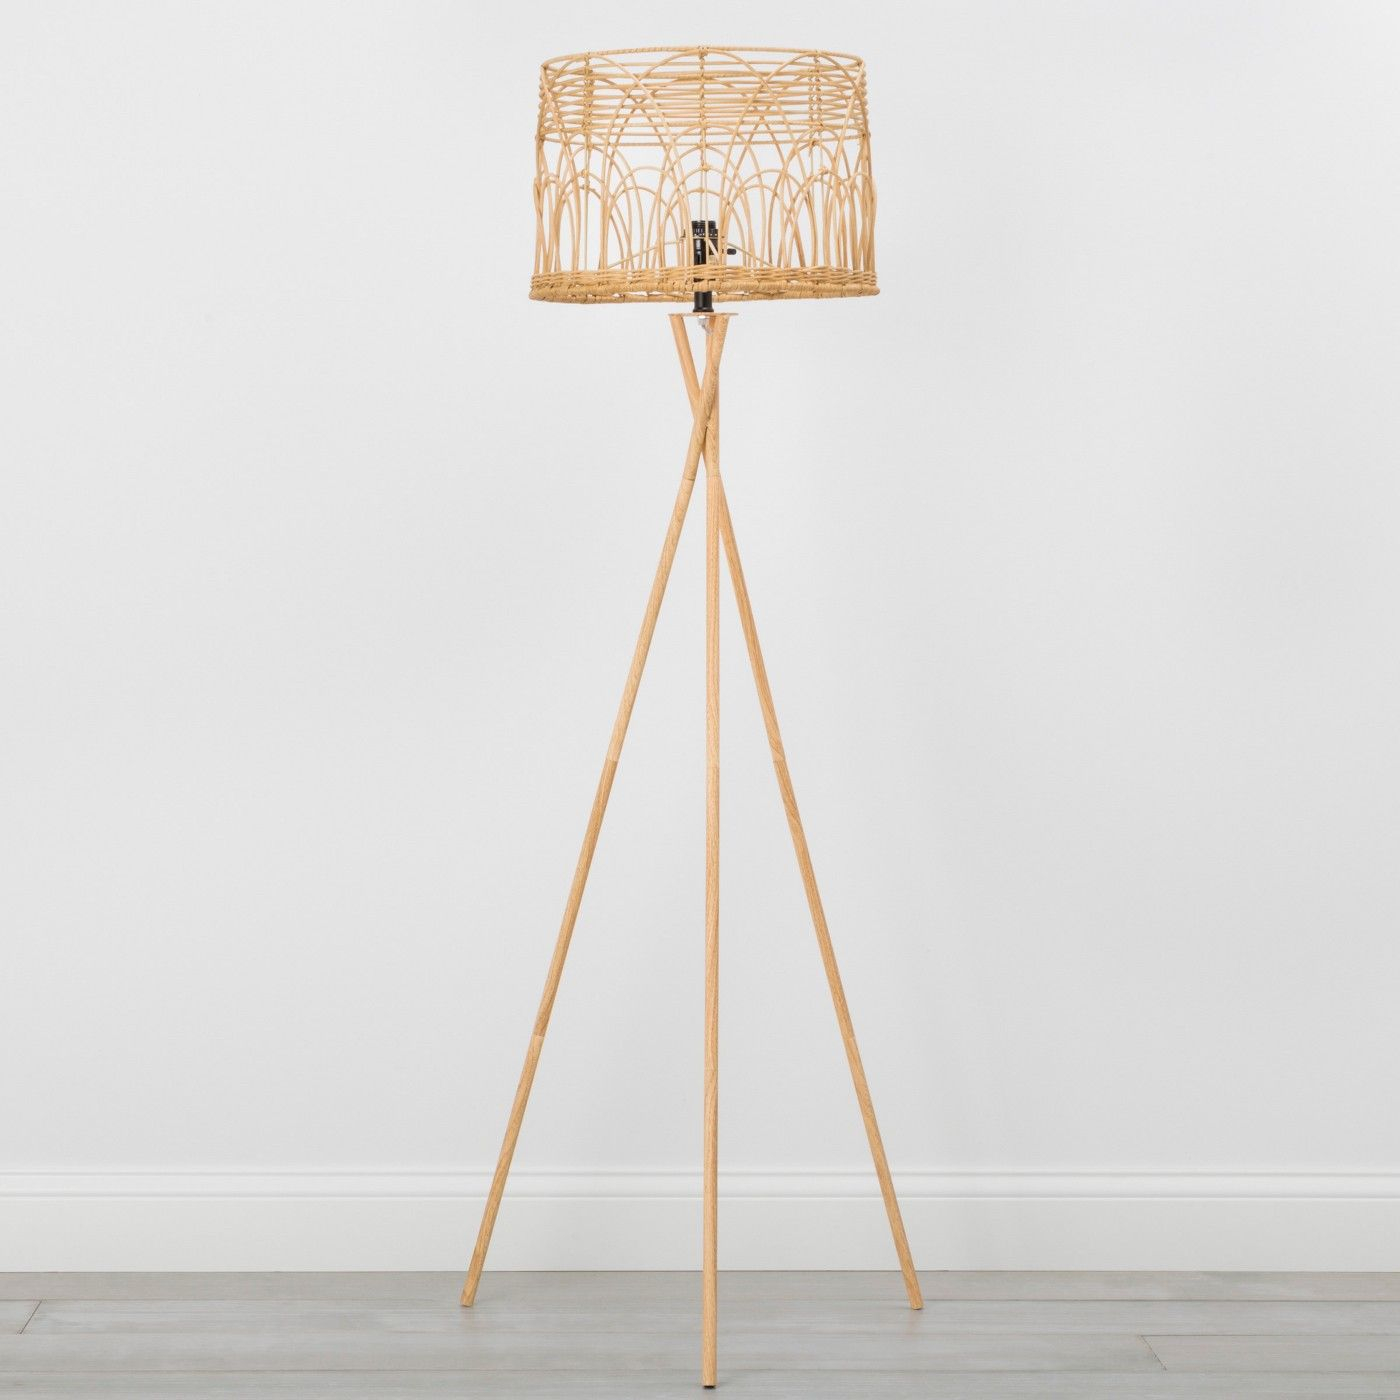 Rattan Tripod Floor Lamp Natural Opalhouse Image 1 Of 4 with sizing 1400 X 1400